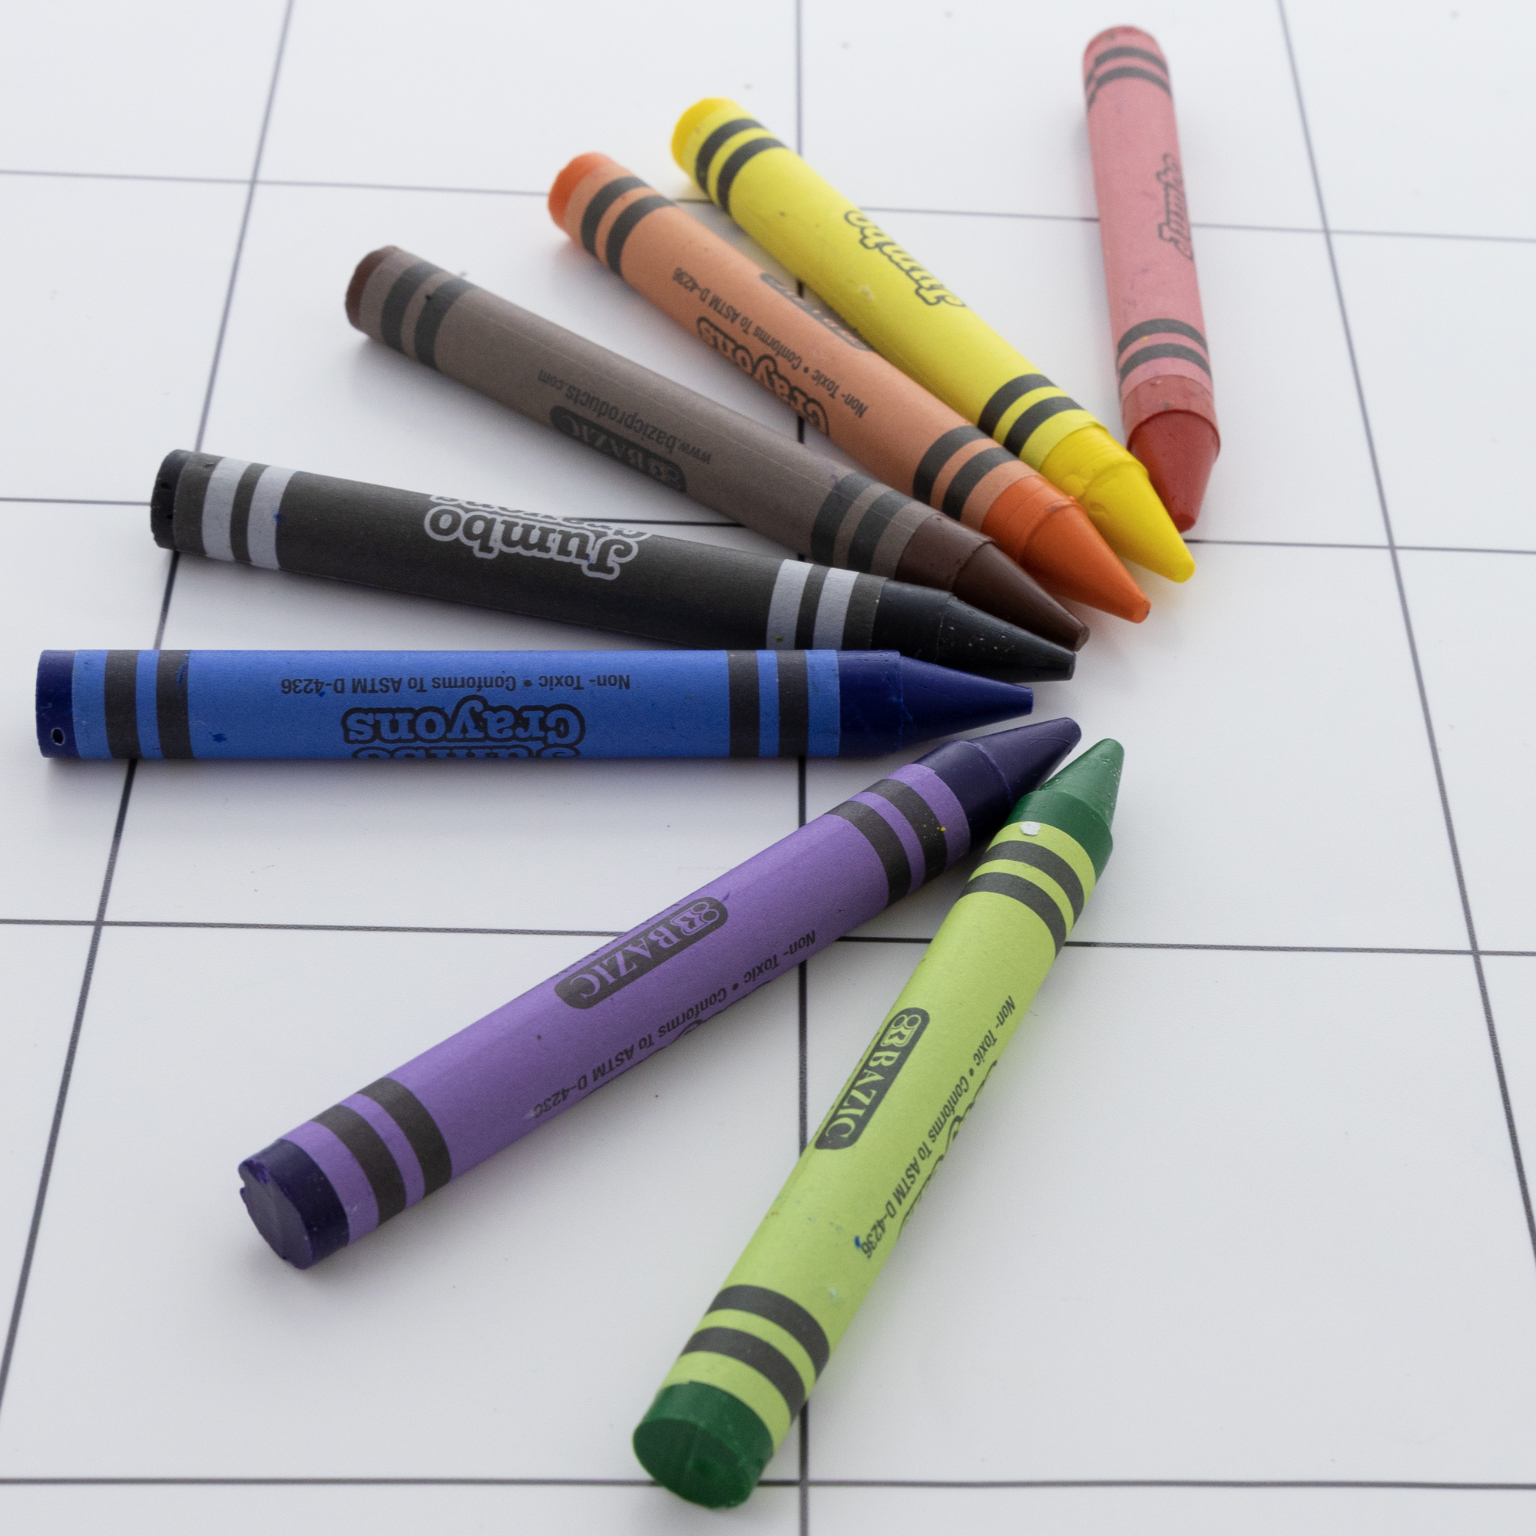 Crayons - Jumbo, 8 Count, Assorted Colors